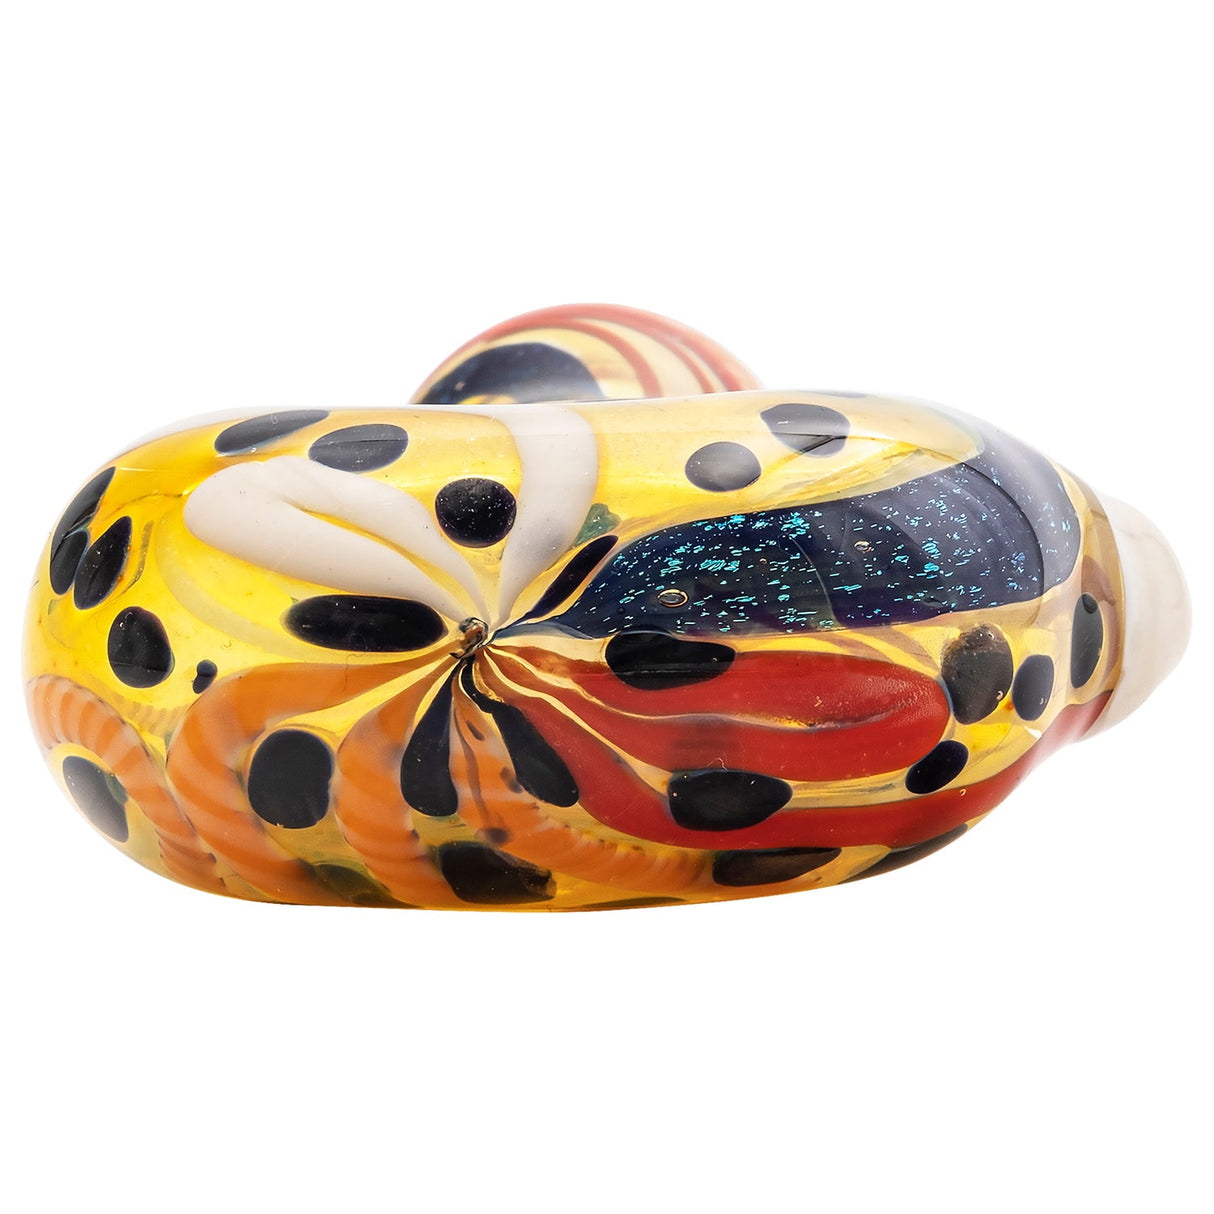 LA Pipes "Pancake" Dichroic Spoon Pipe with Color-Changing Design, 4.25" Length